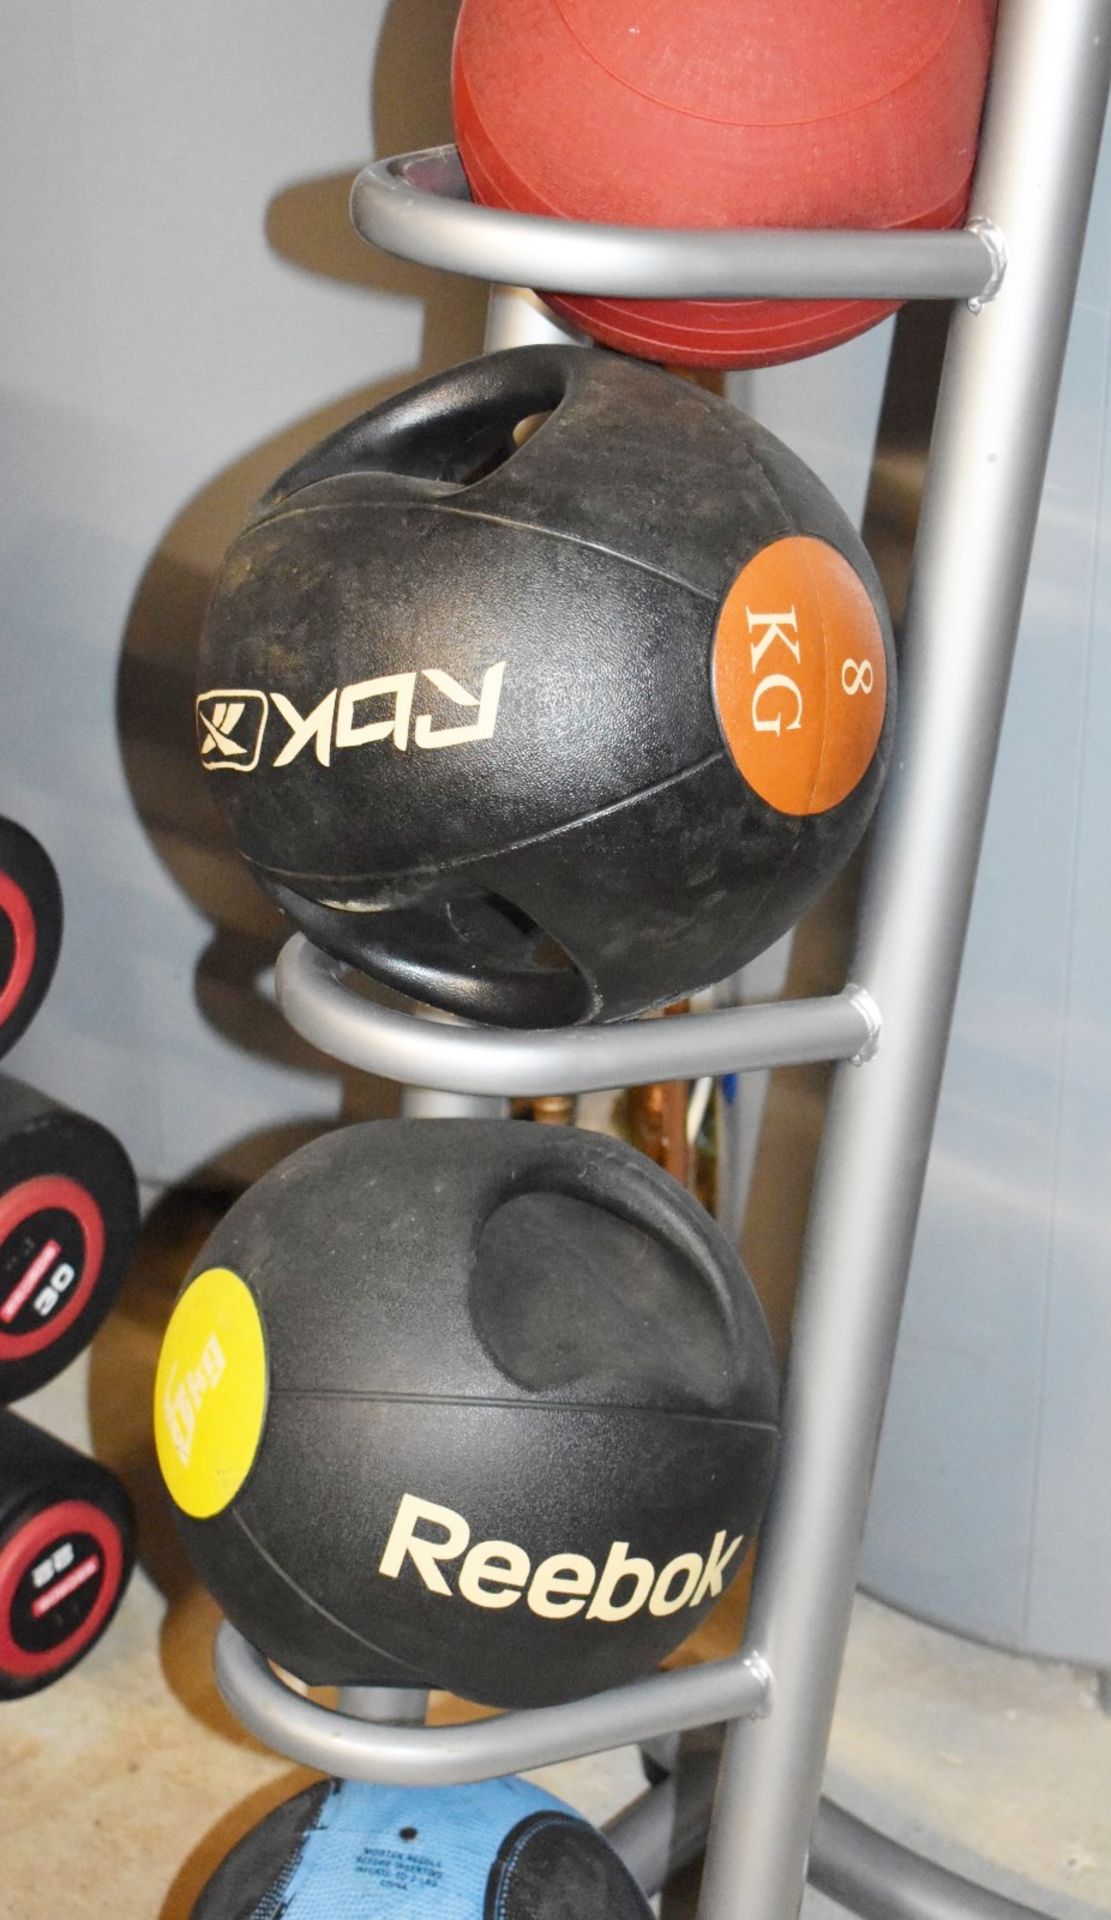 5 x Fitness Medicine Balls - Features Jordon Slam Ball and Reebok - Includes Ball Rack - CL546 - - Image 3 of 10